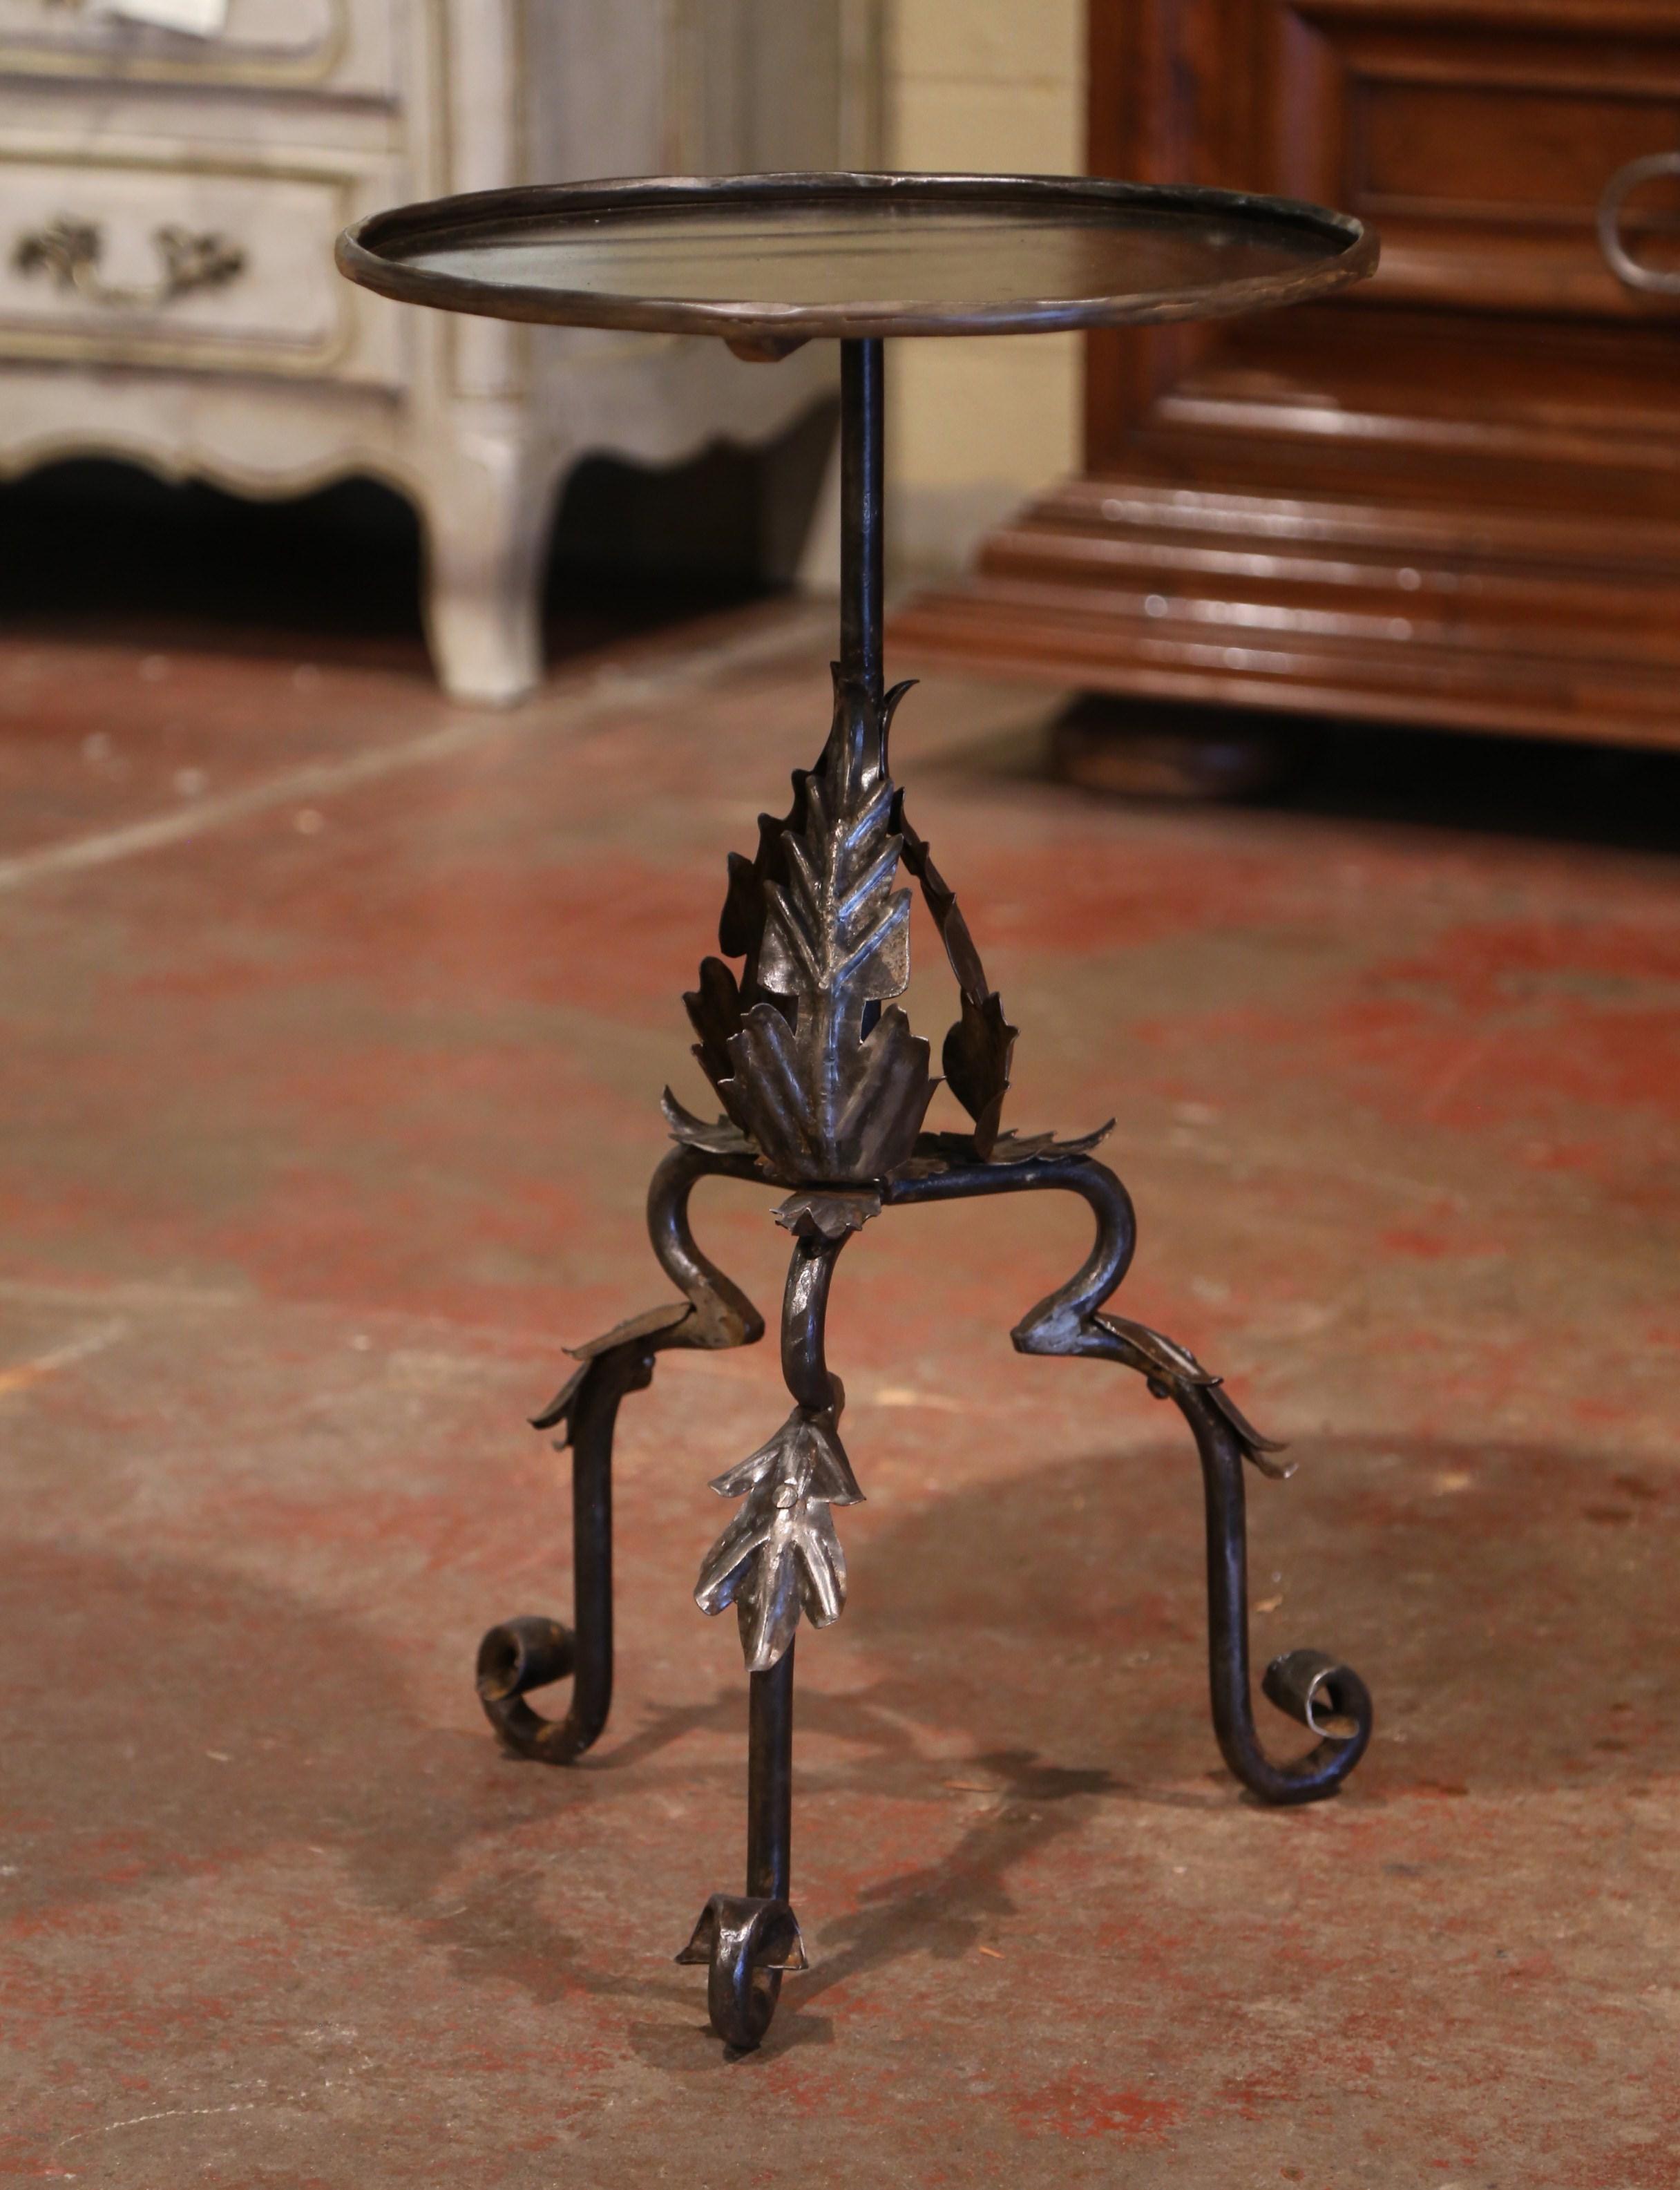 This elegant, antique Gothic pedestal table was crafted in Southern France, circa 1920. The intricate martini table stands on three forged legs embellished with acanthus leaves, over a central pedestal stem decorated with leaf motifs. The serving